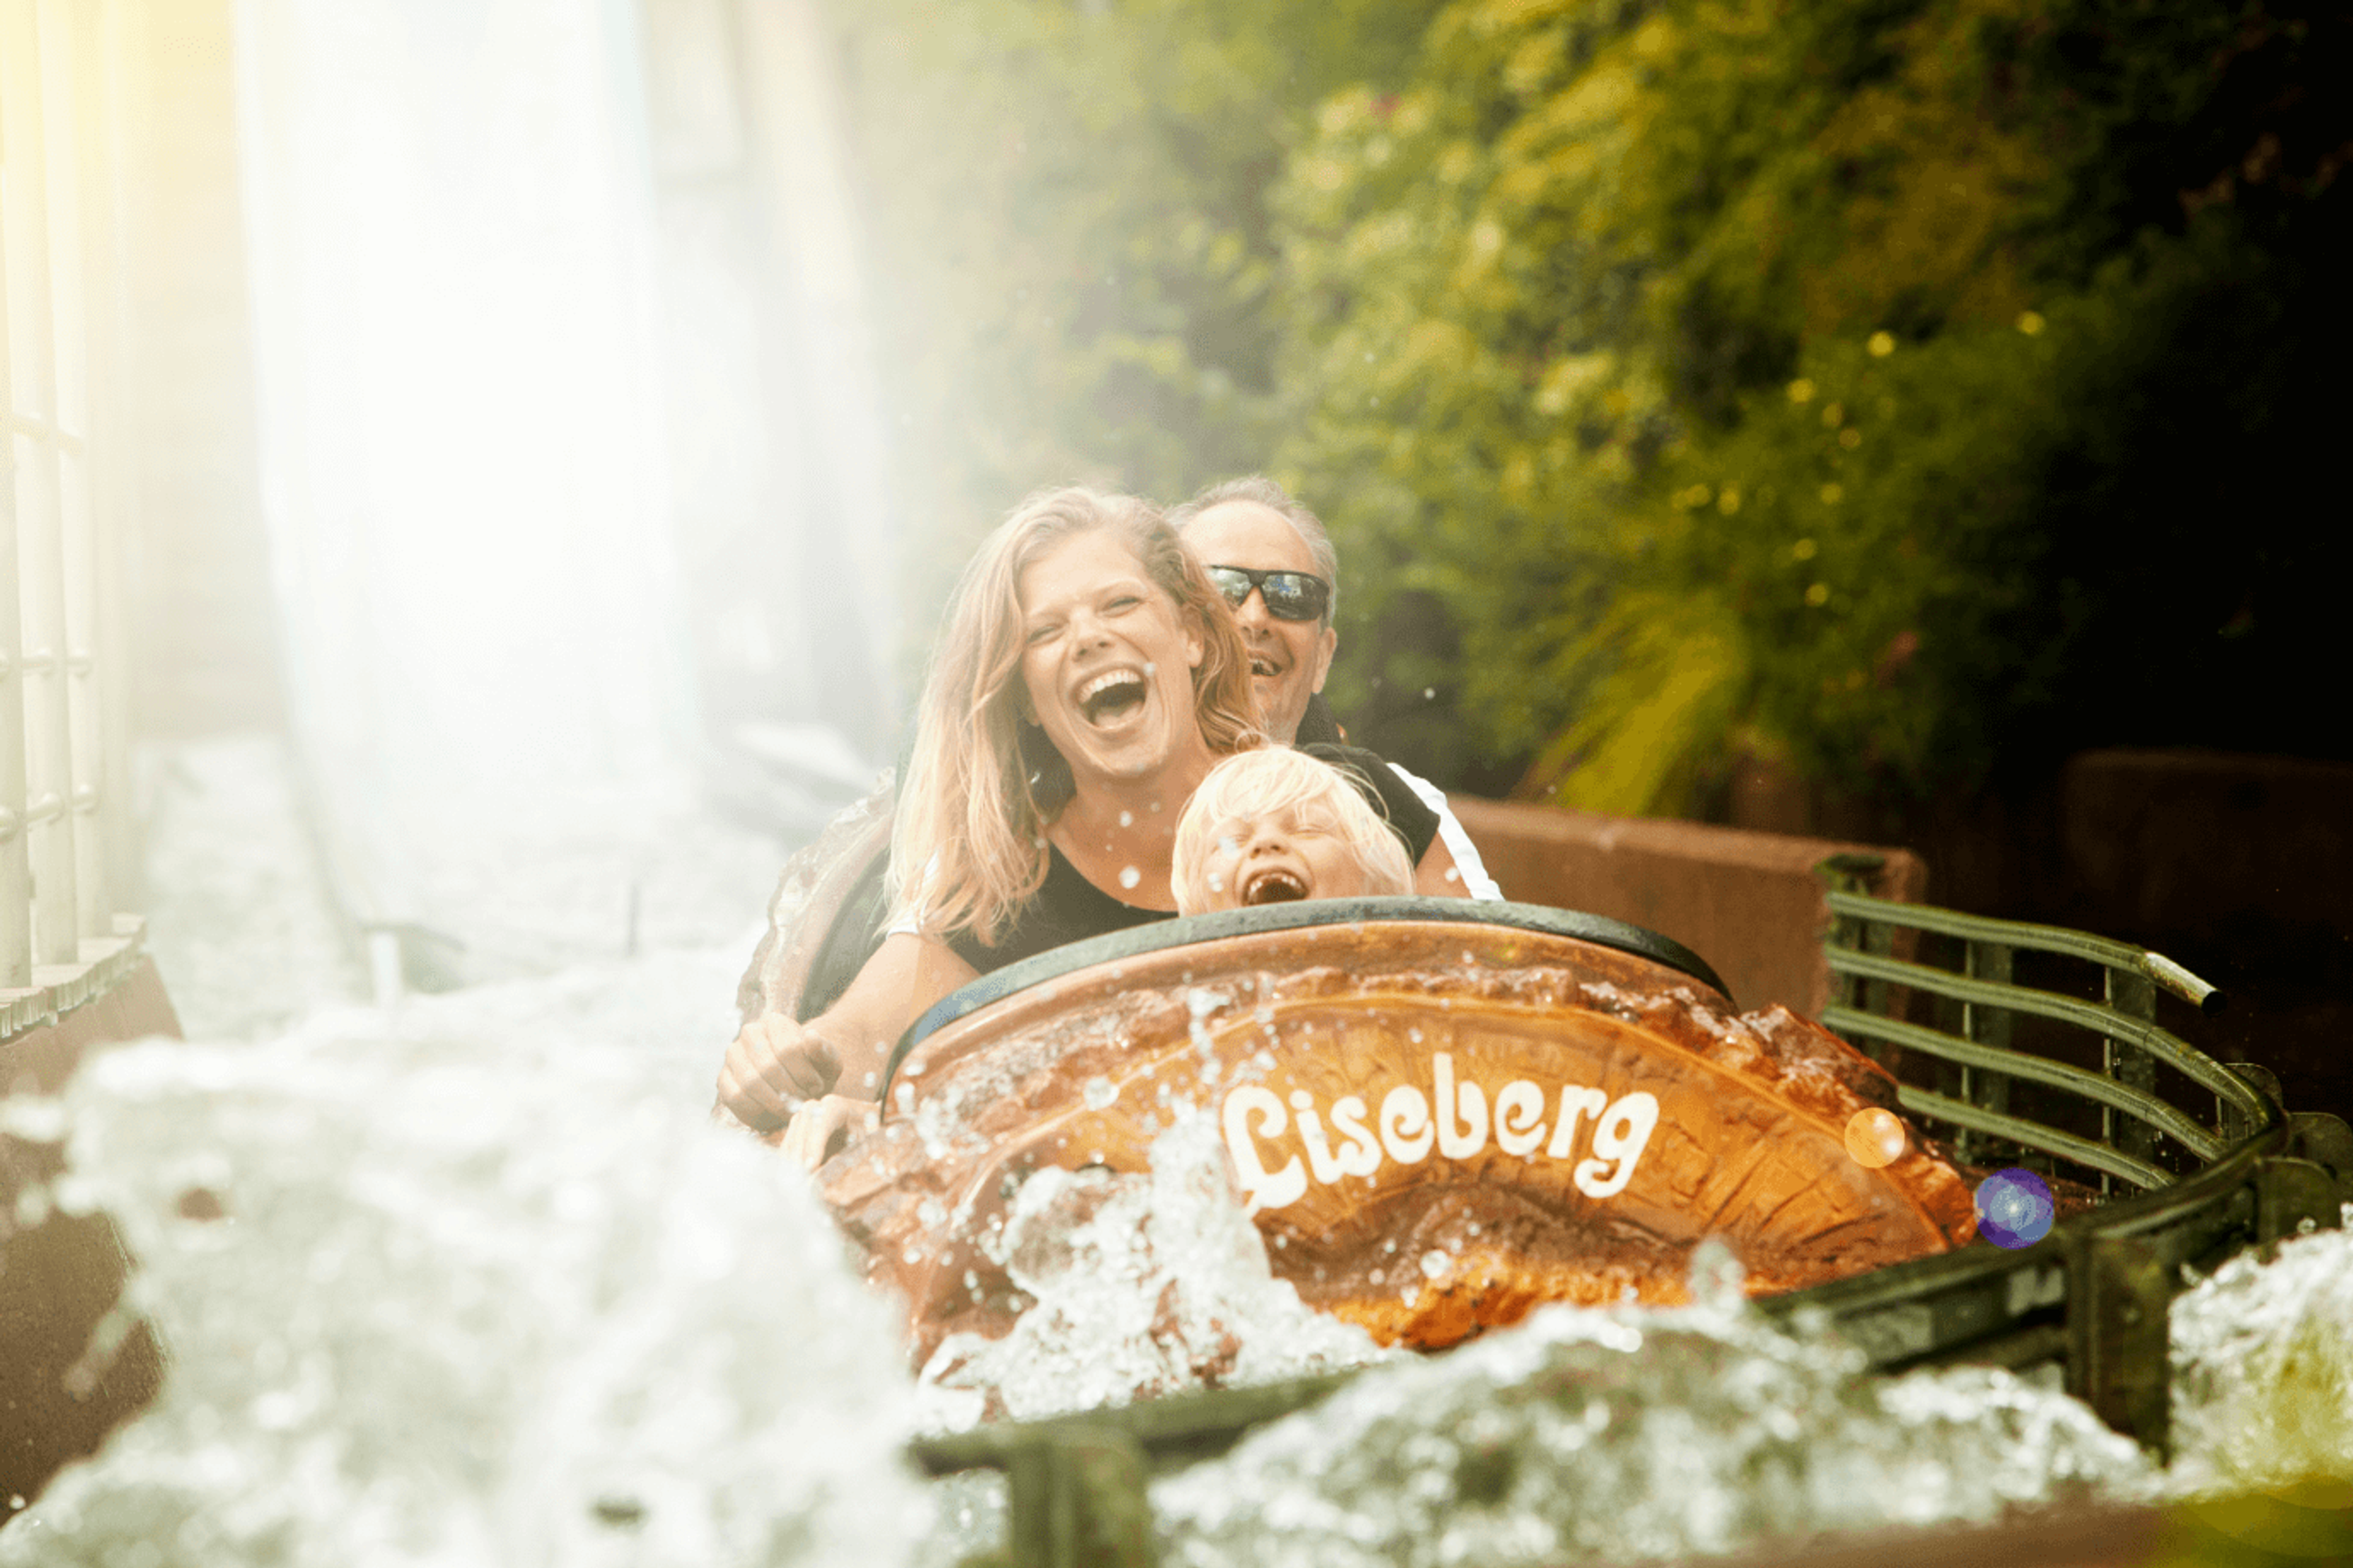 A photo showing two people on a ride crashing through water. The people are smiling and excited.